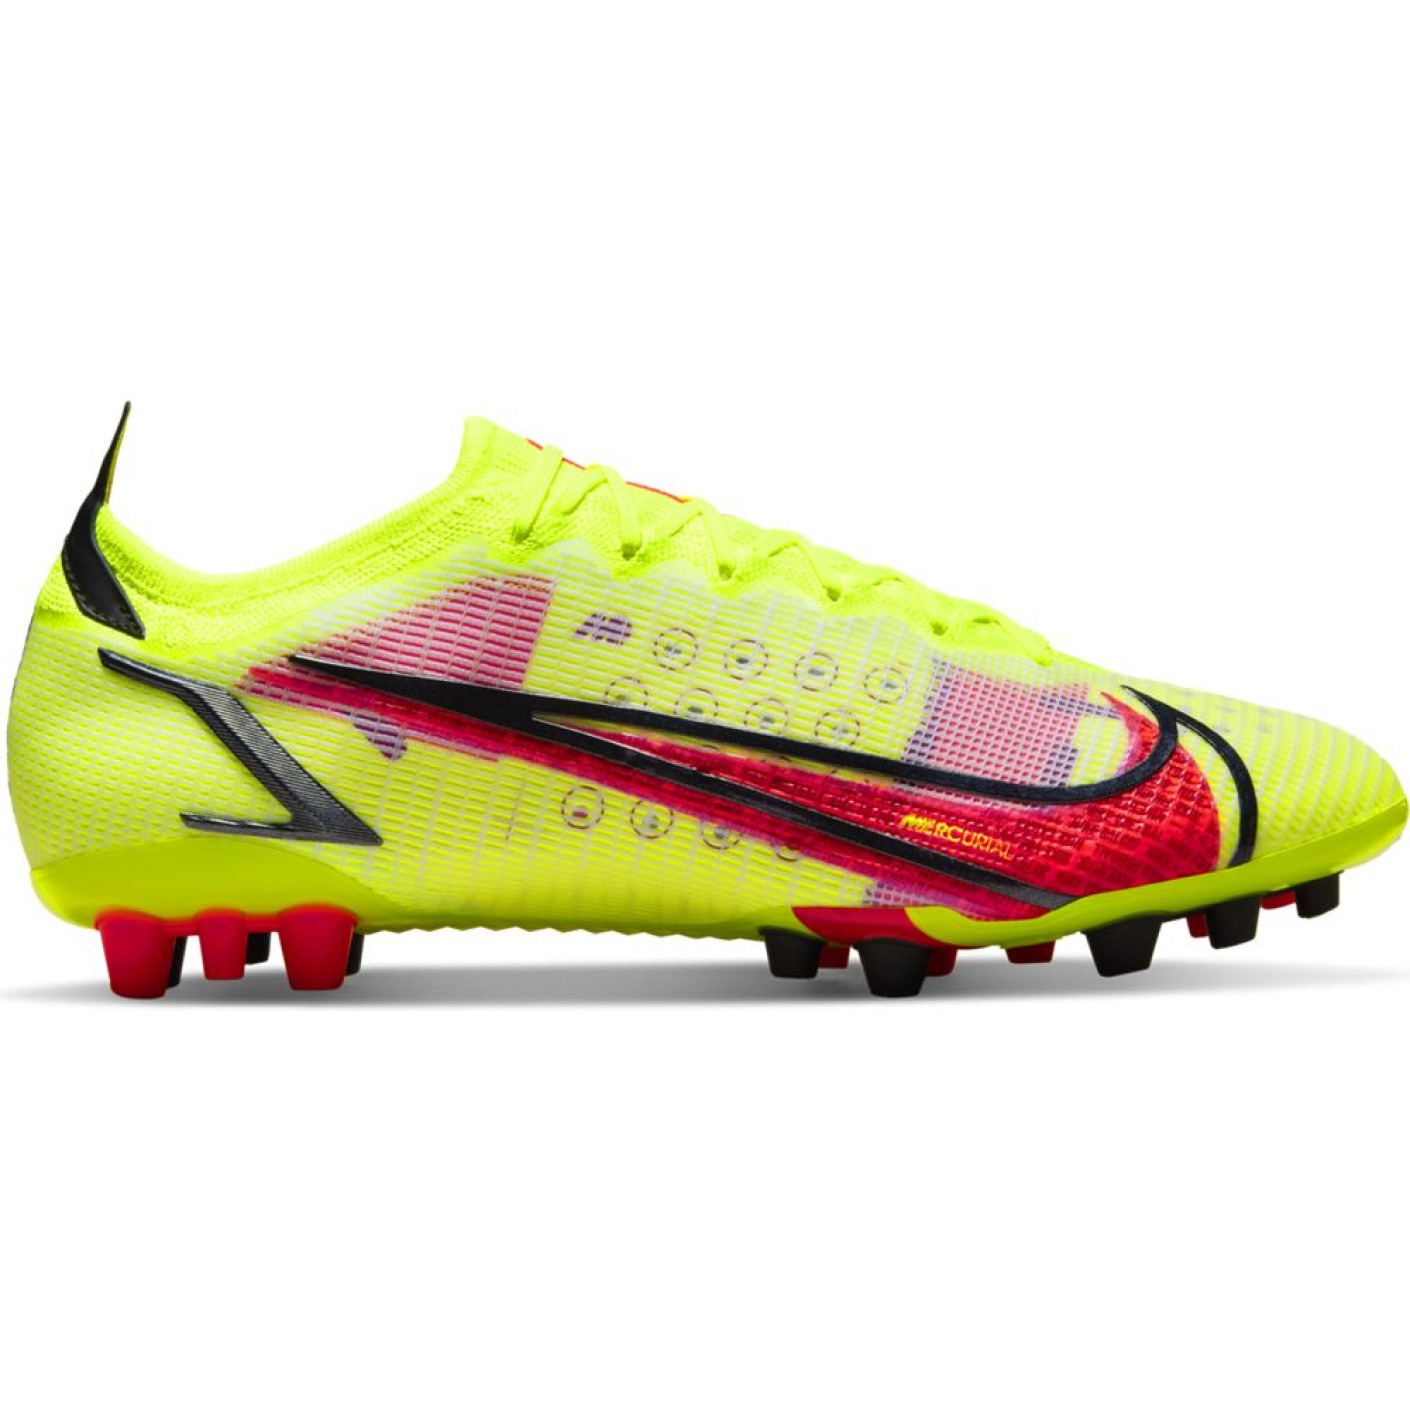 Donder Plotselinge afdaling Concentratie Nike Mercurial Vapor 14 Elite Artificial Grass Football Boots (AG) Yellow  Red Black - KNVBshop.nl